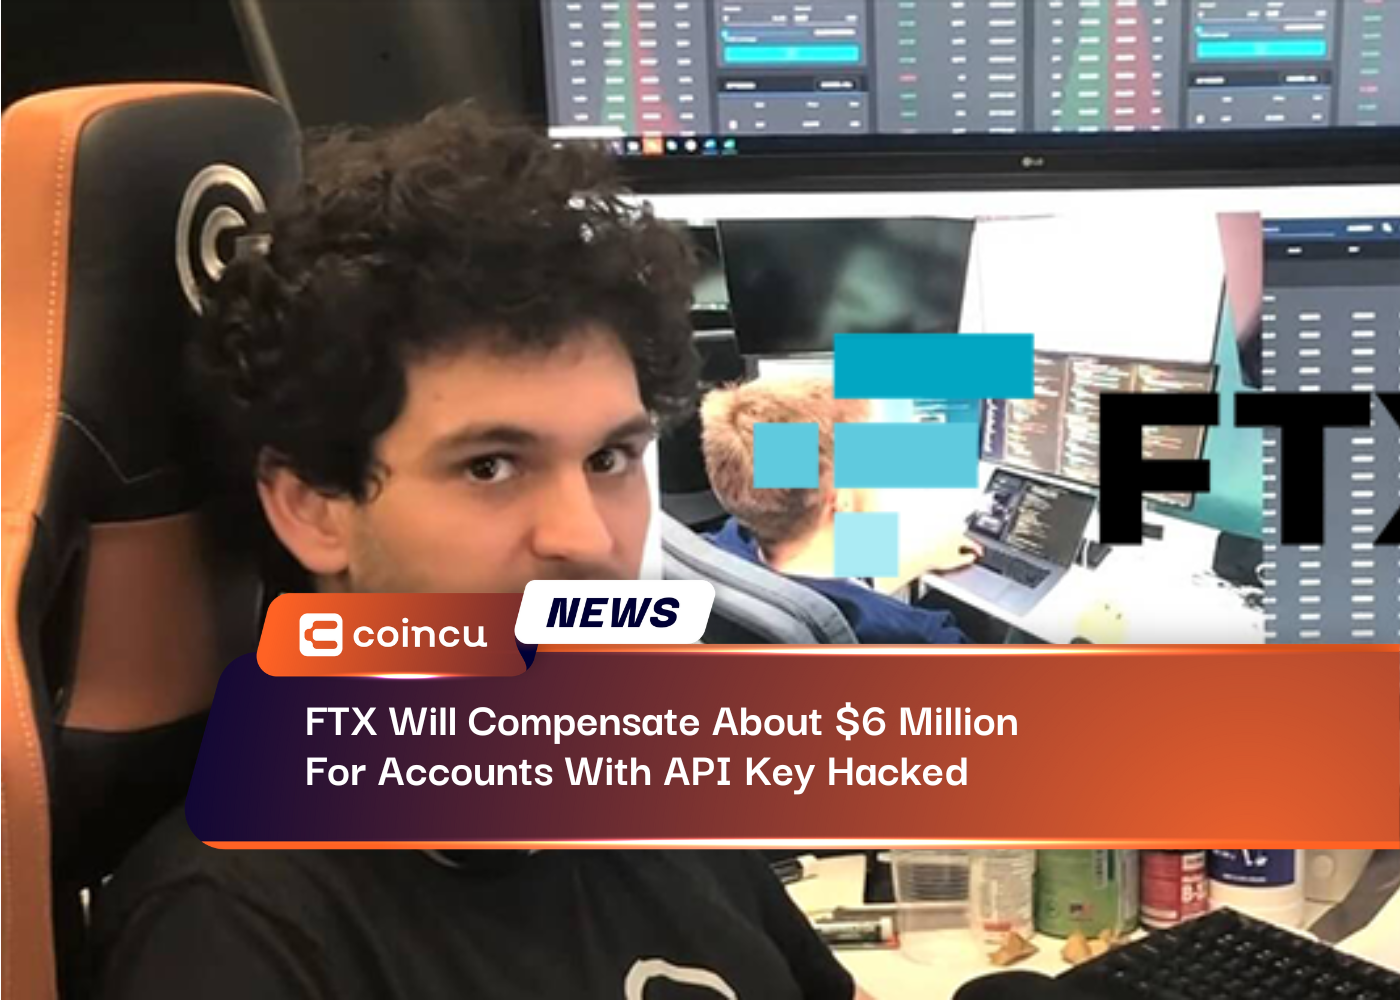 FTX Will Compensate About $6 Million For Accounts With API Key Hacked